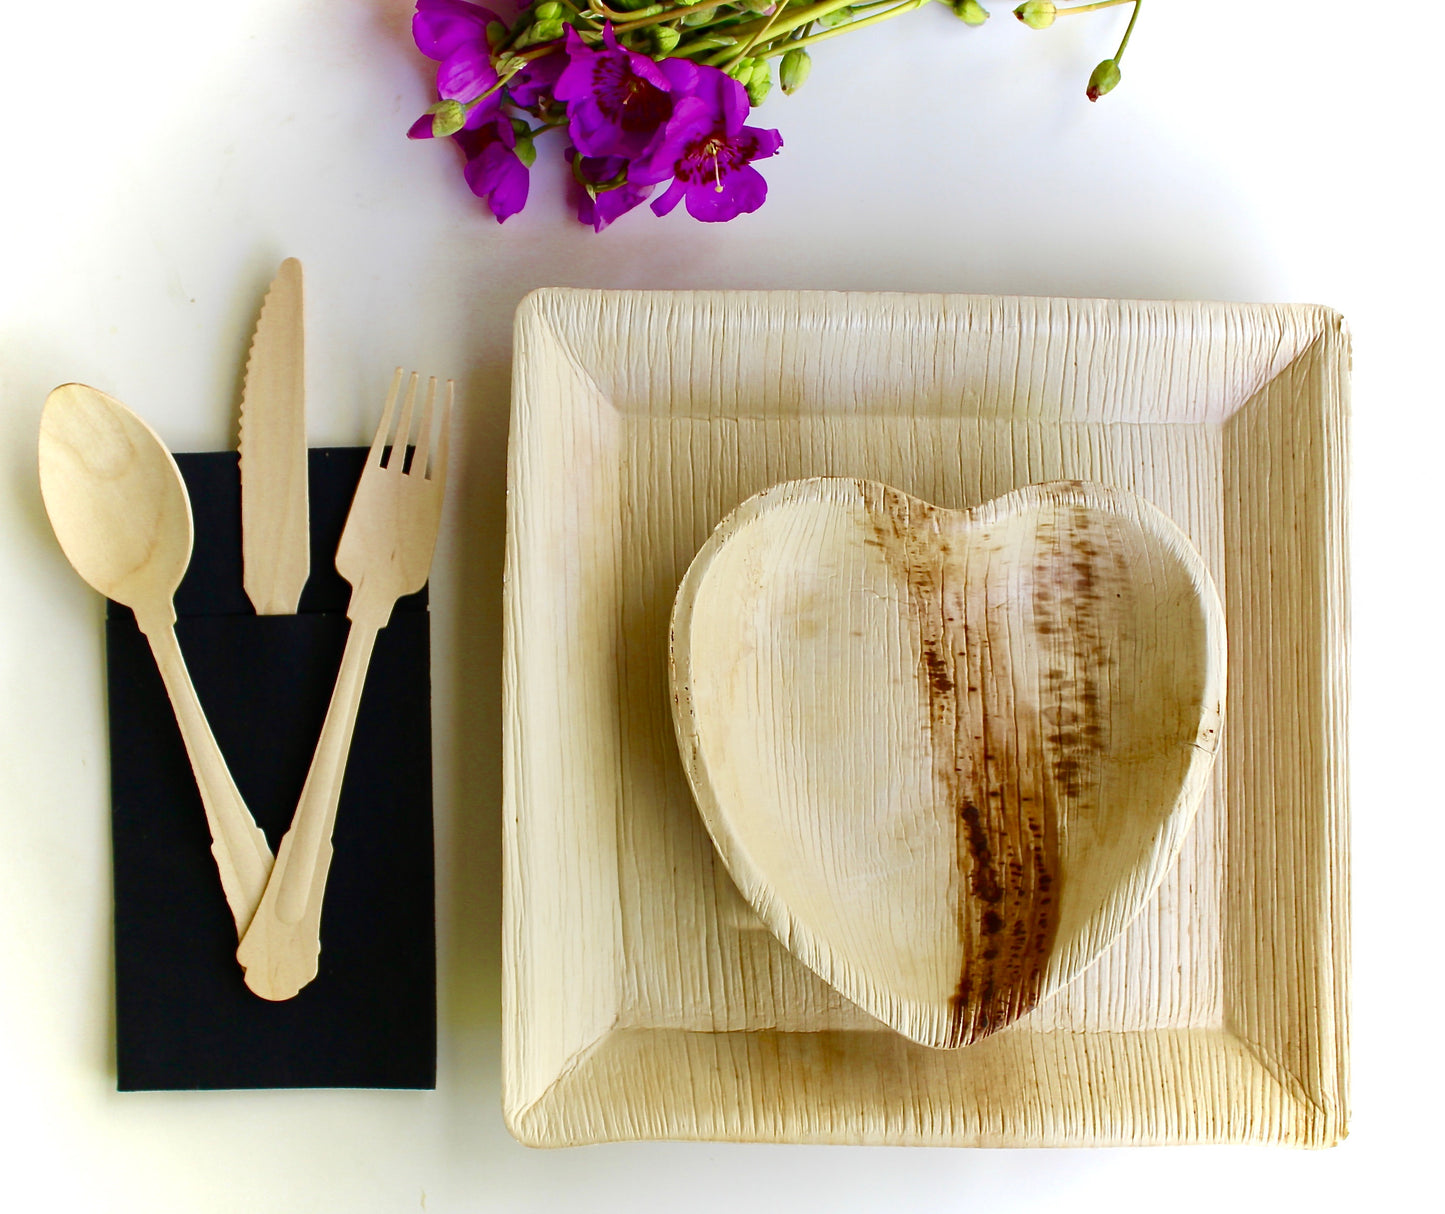 palm leaf plates 10 pice 10" Square deep   - 10 pic 6" Heart   and   30  pic cutler - 50 pic napkin   disposable and biodegrable - compostable